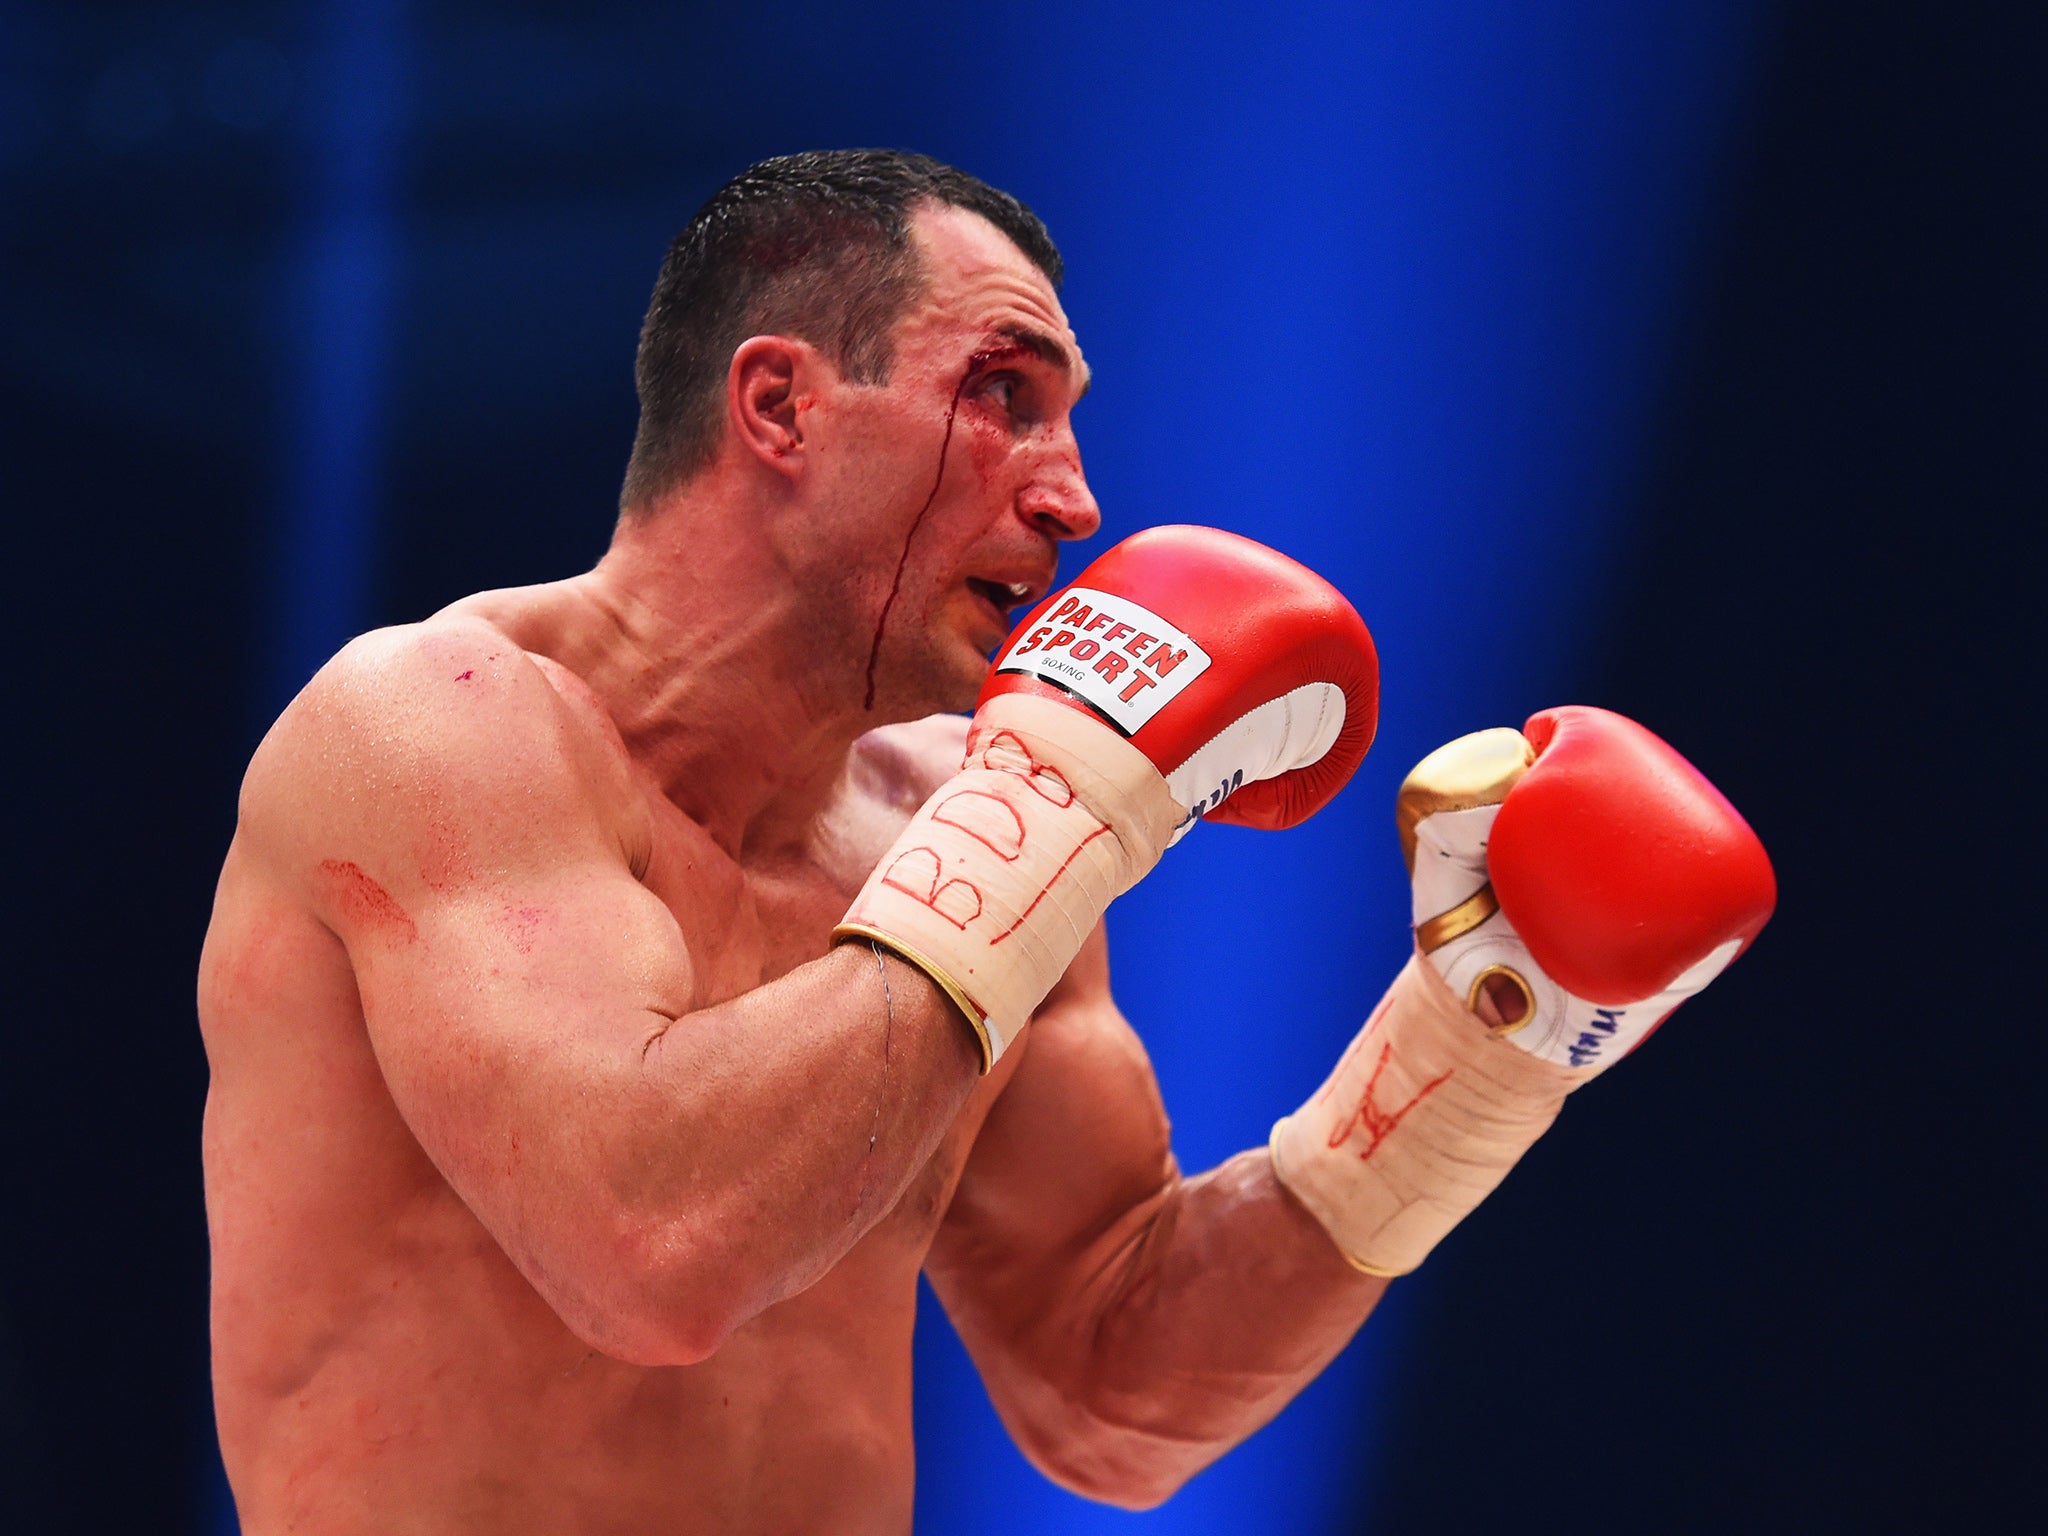 Wladimir Klitschko's face marked up more and more as the fight wore on